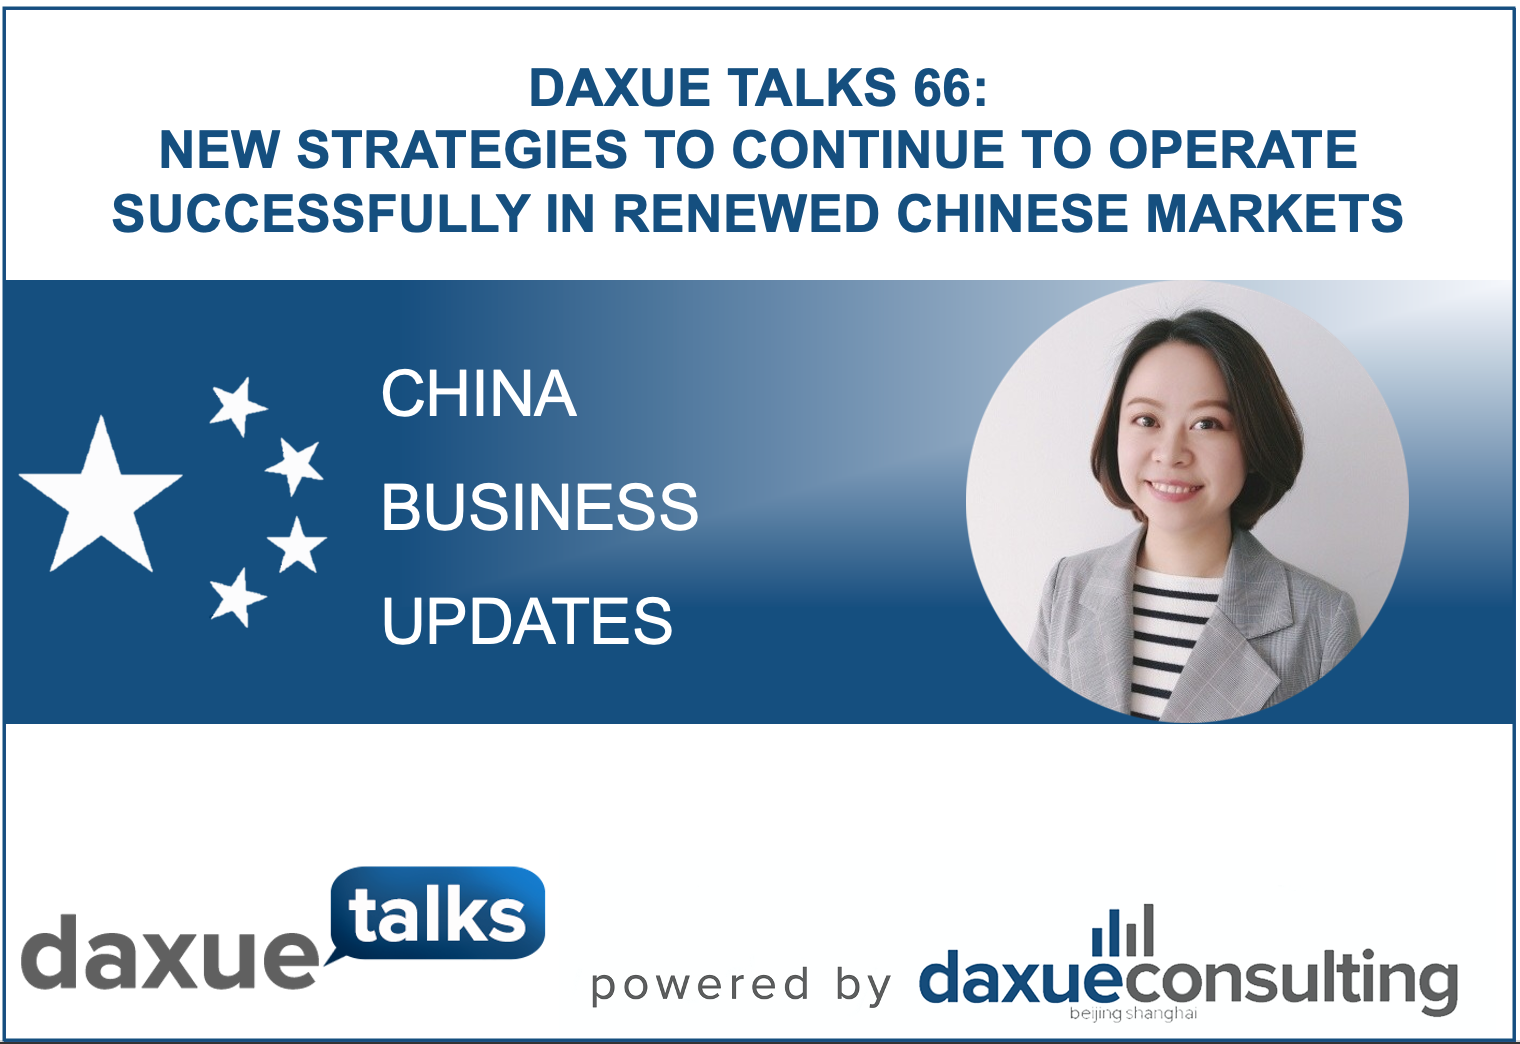 Daxue Talks 66: New strategies to operate successfully in renewed Chinese markets